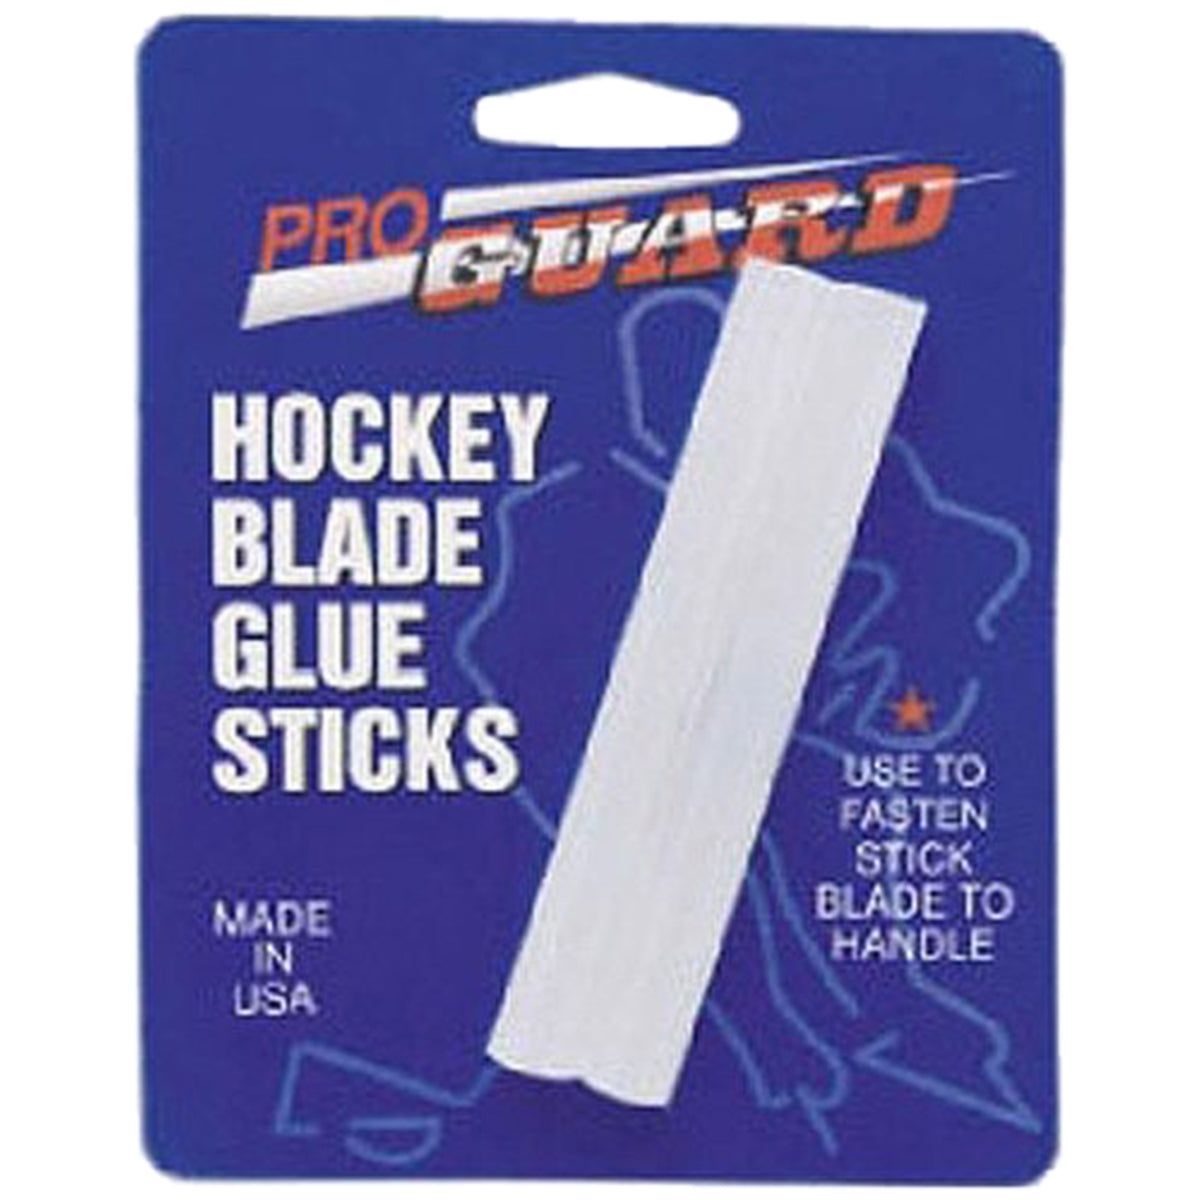 Pro Guard Hockey Blade Glue Stick Not Applicable Style : 0056